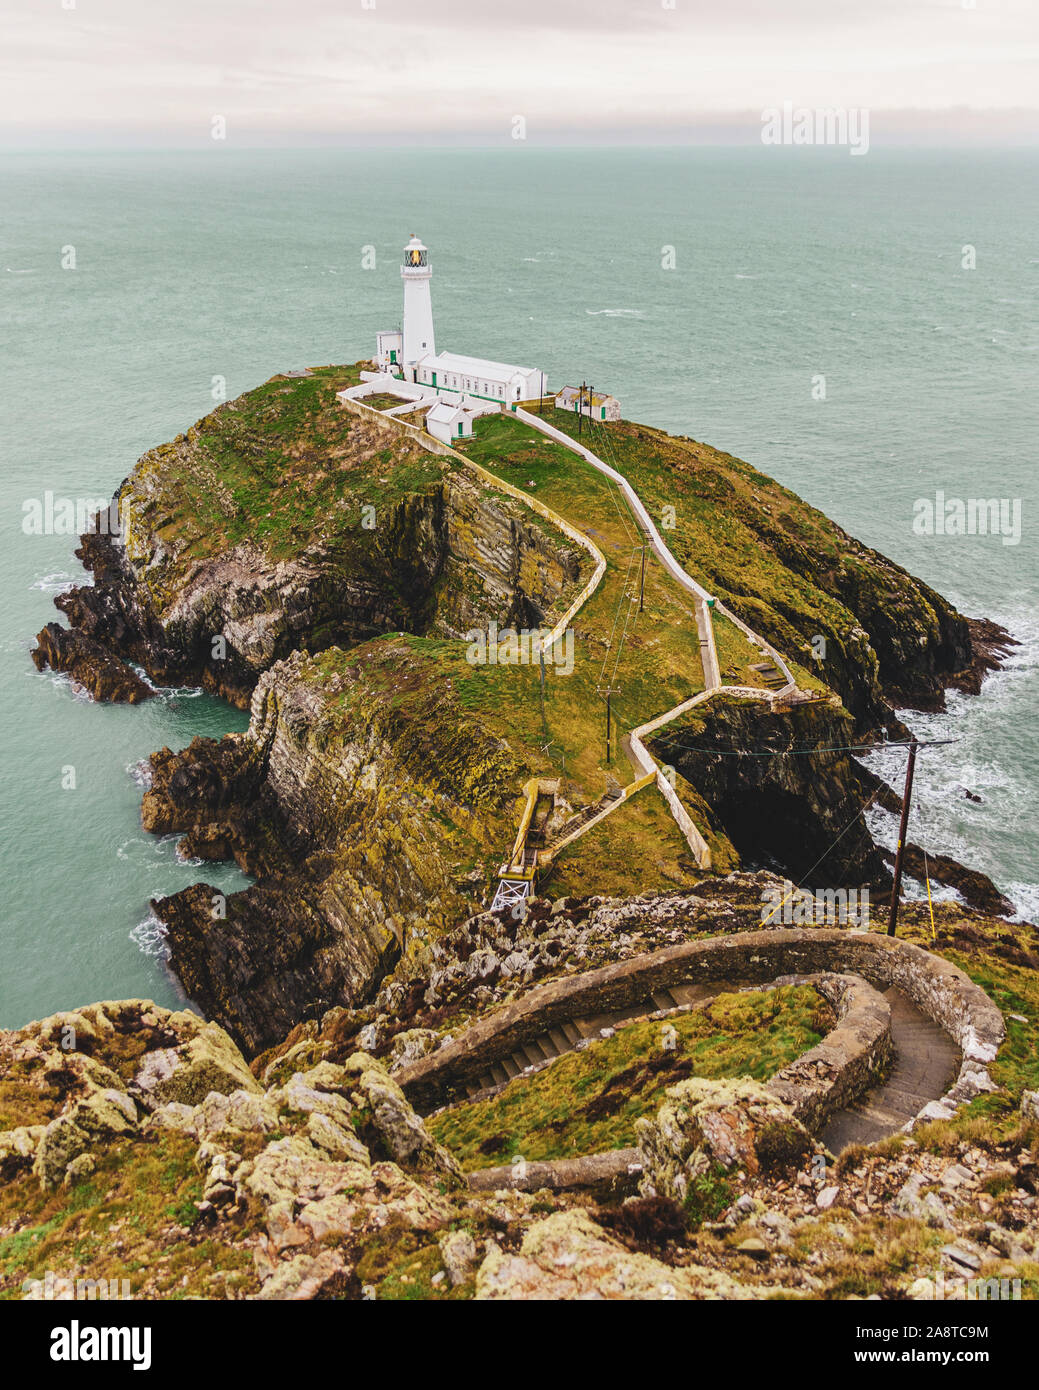 A view of South Stack Lighthouse, Wales Stock Photo